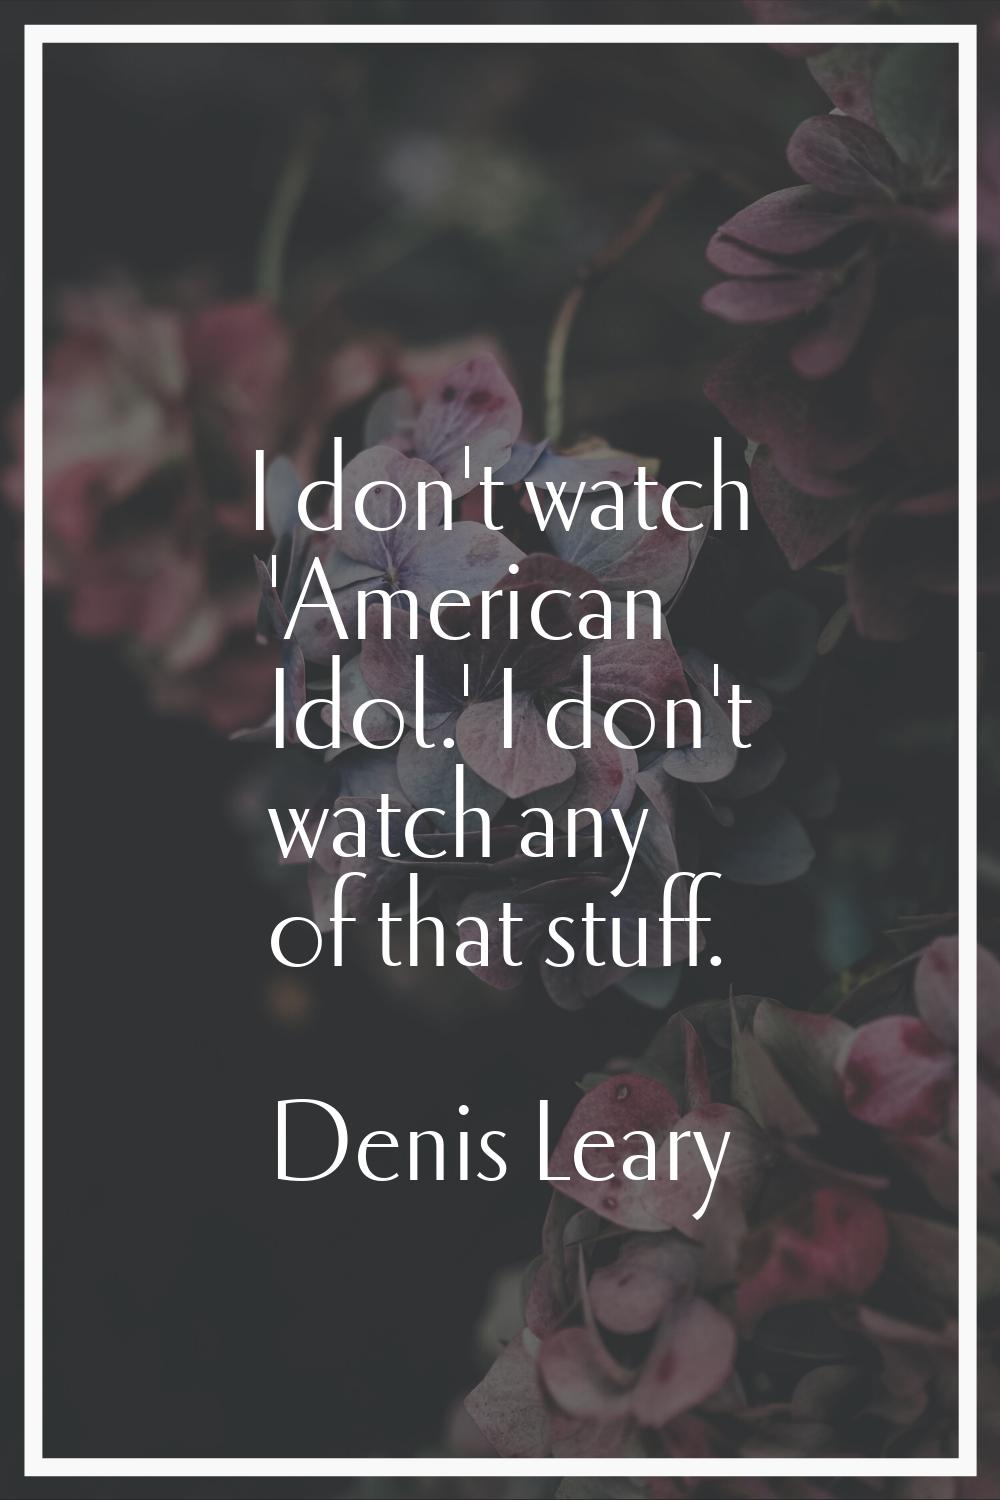 I don't watch 'American Idol.' I don't watch any of that stuff.